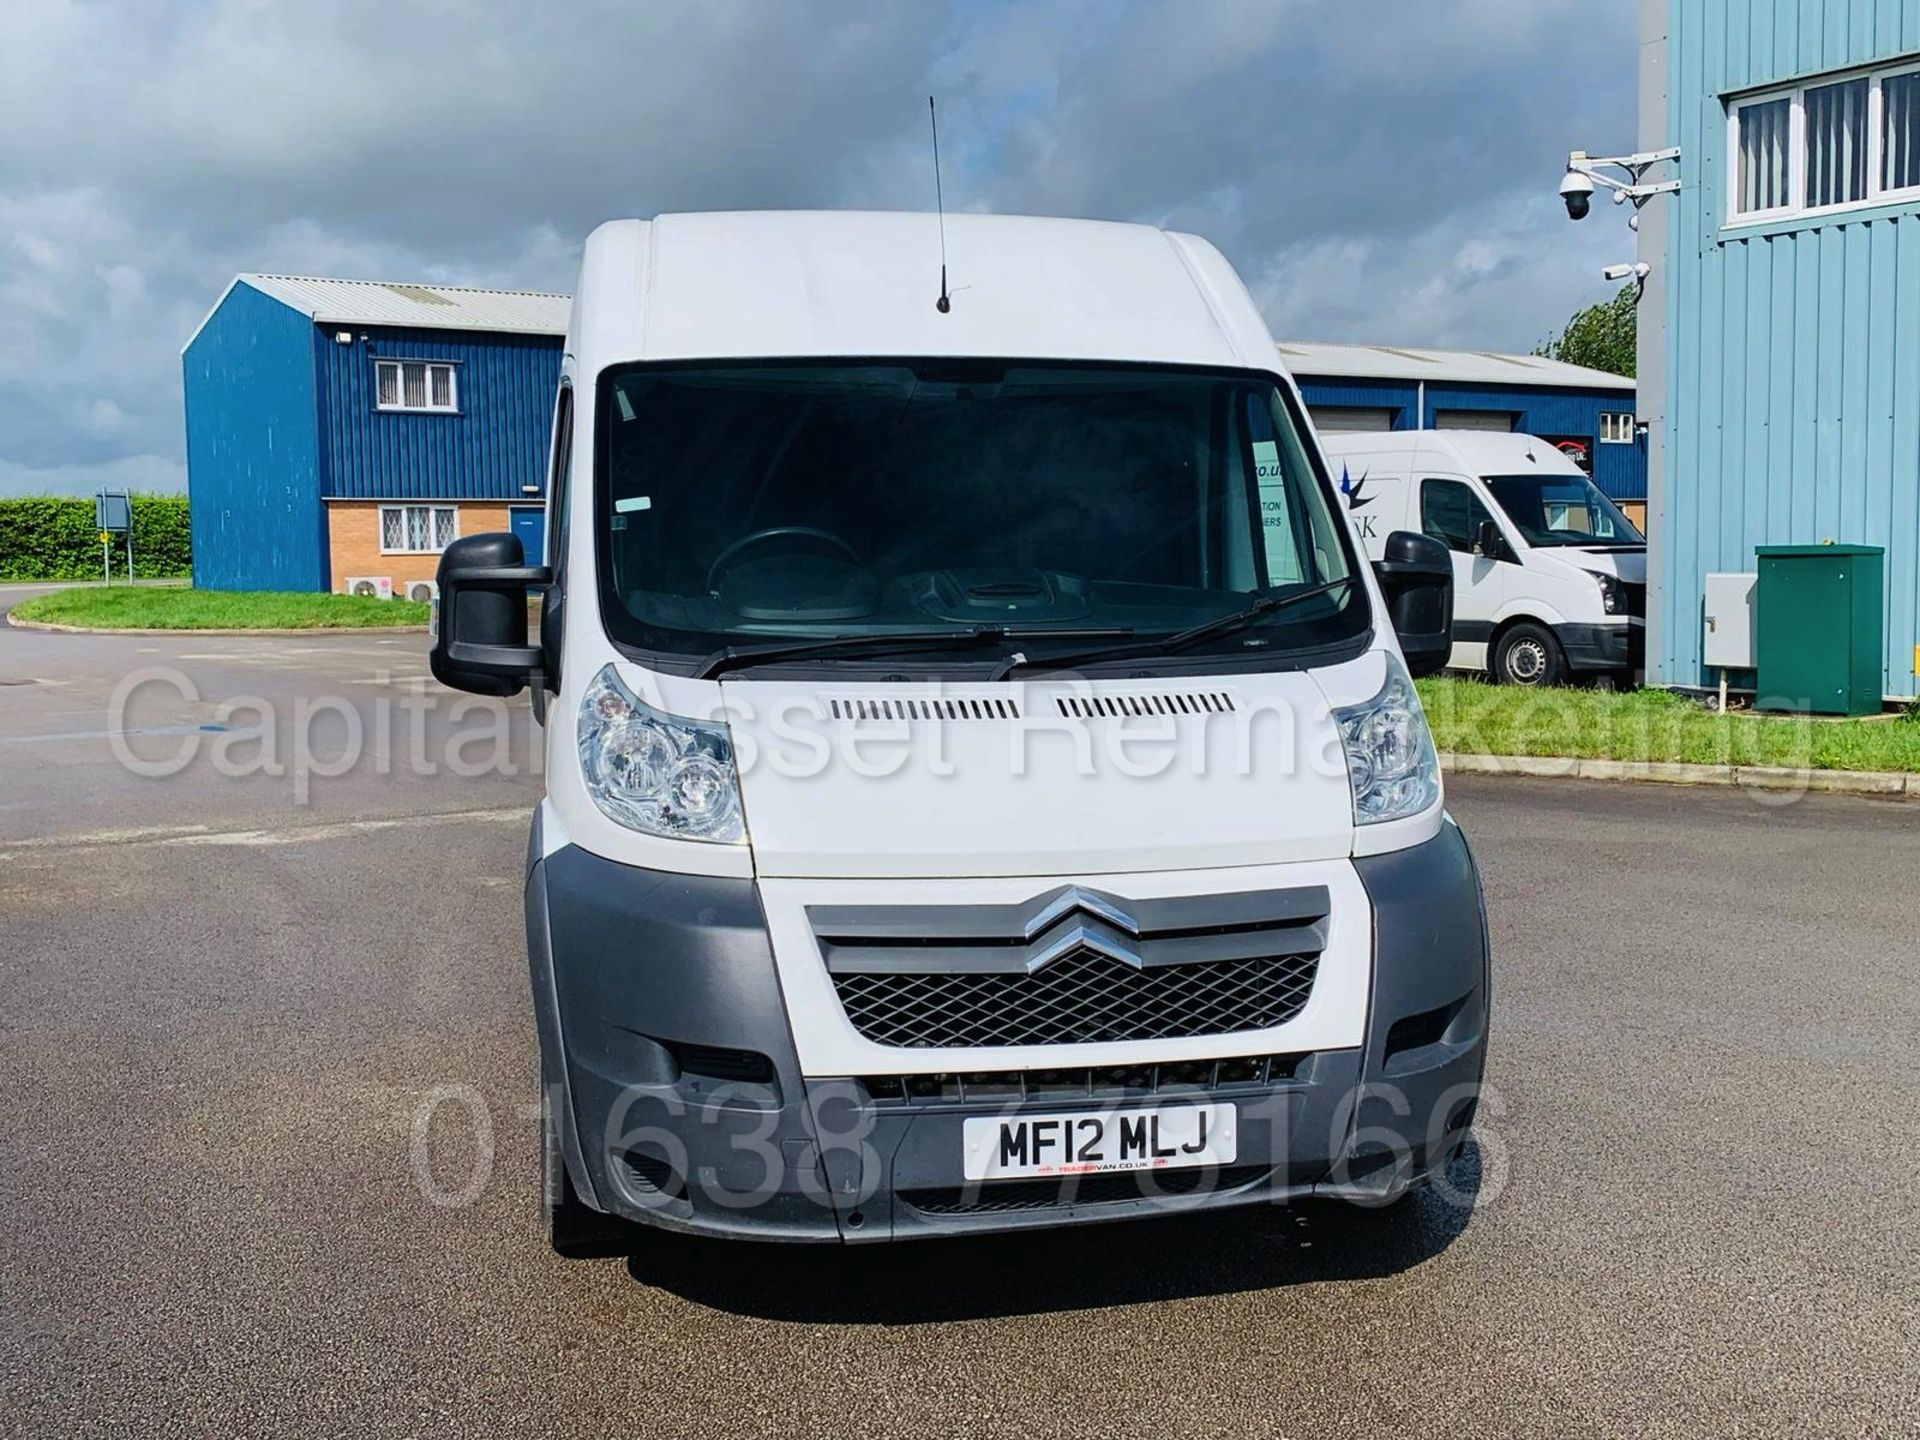 CITROEN RELAY 'L4 EXTRA LWB HI-ROOF' (2012) '2.2 HDI - 130 BHP - 6 SPEED' **LOW MILES** - Image 9 of 21